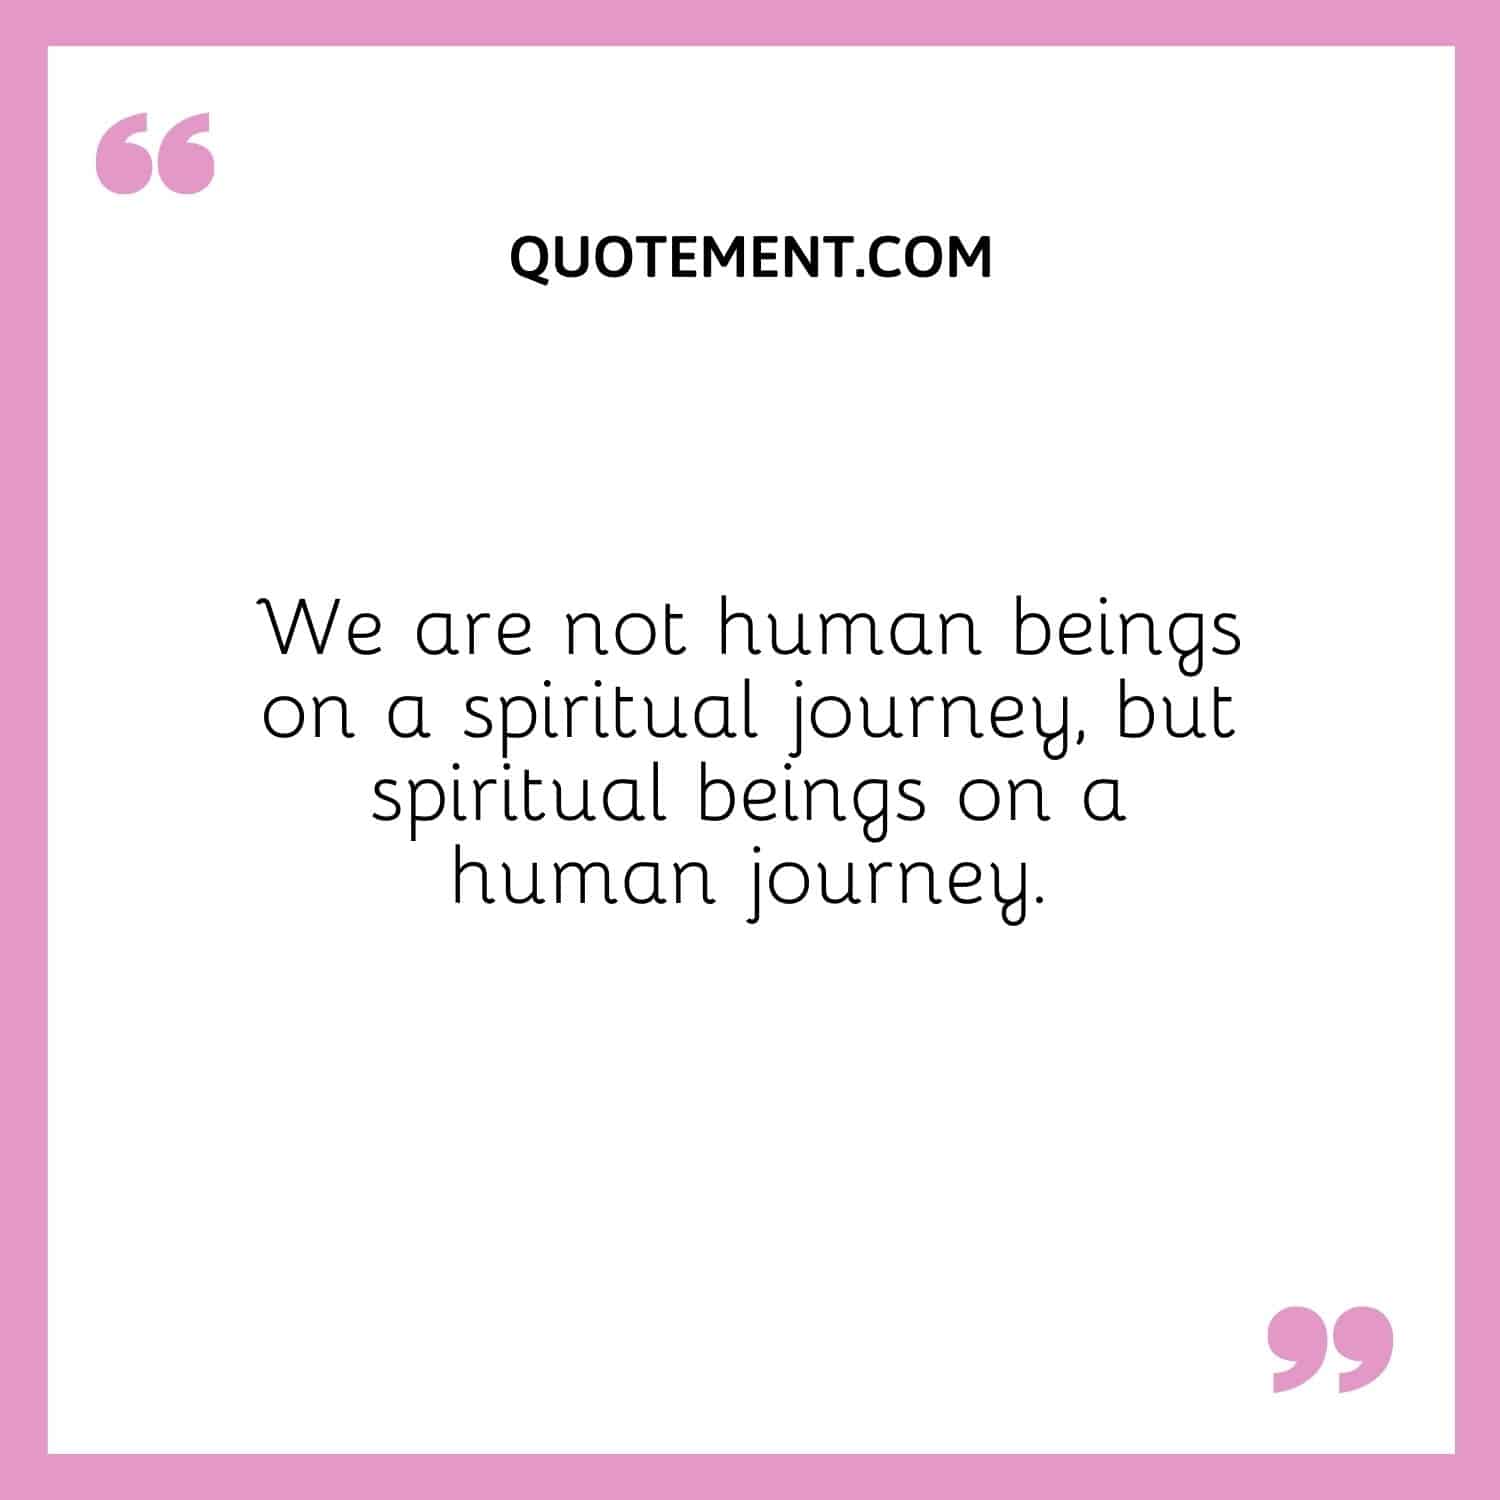 We are not human beings on a spiritual journey, but spiritual beings on a human journey.